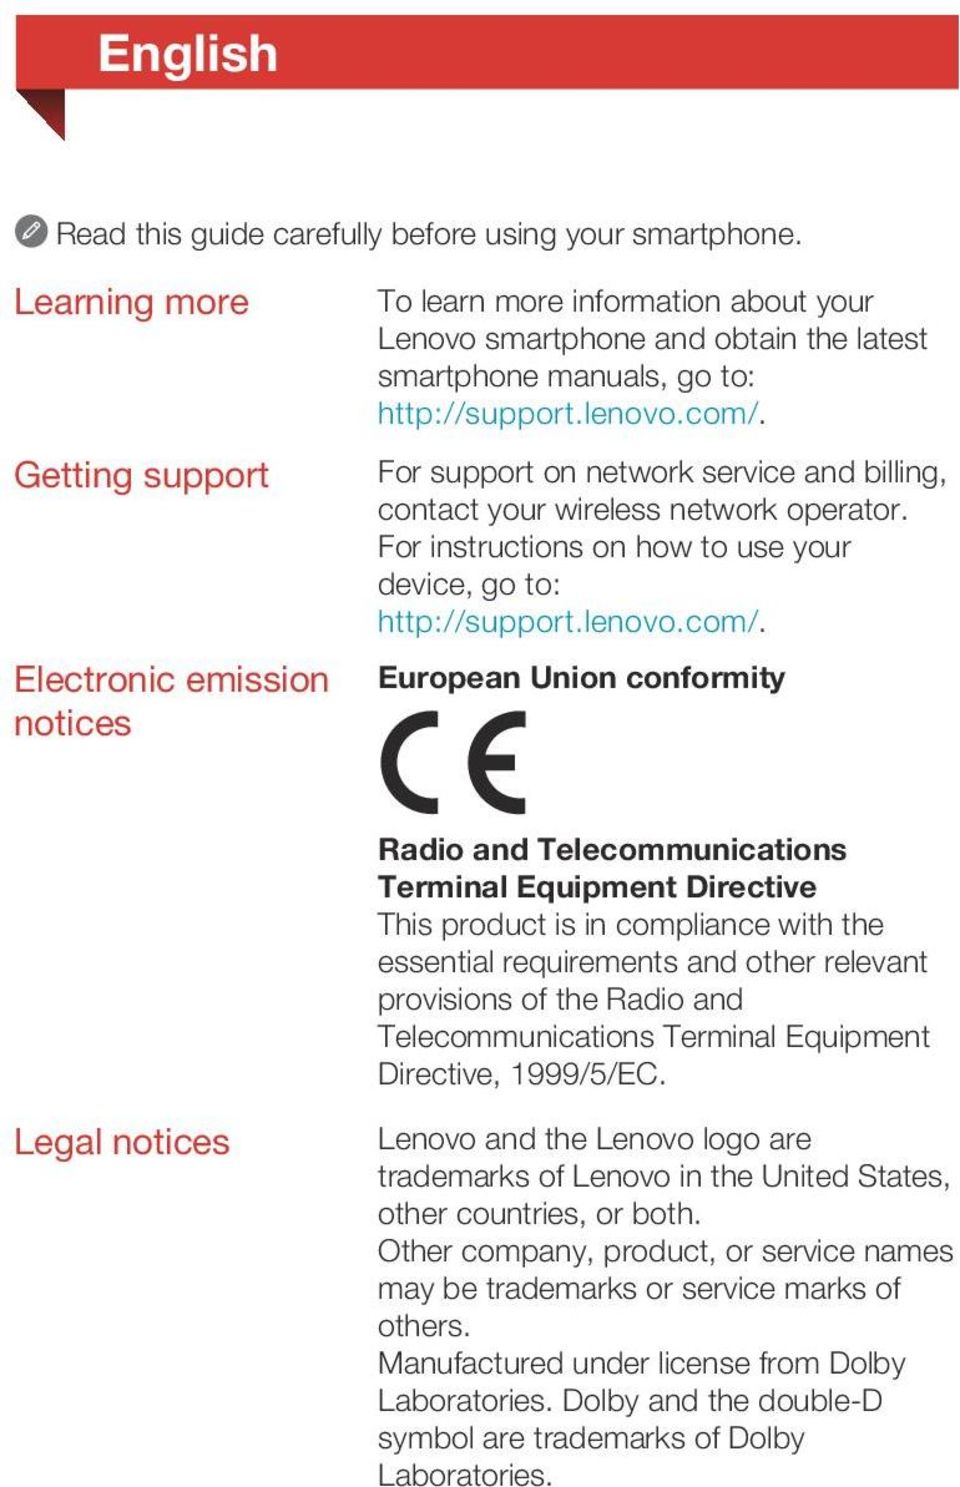 For support on network service and billing, contact your wireless network operator. For instructions on how to use your device, go to: http://support.lenovo.com/.